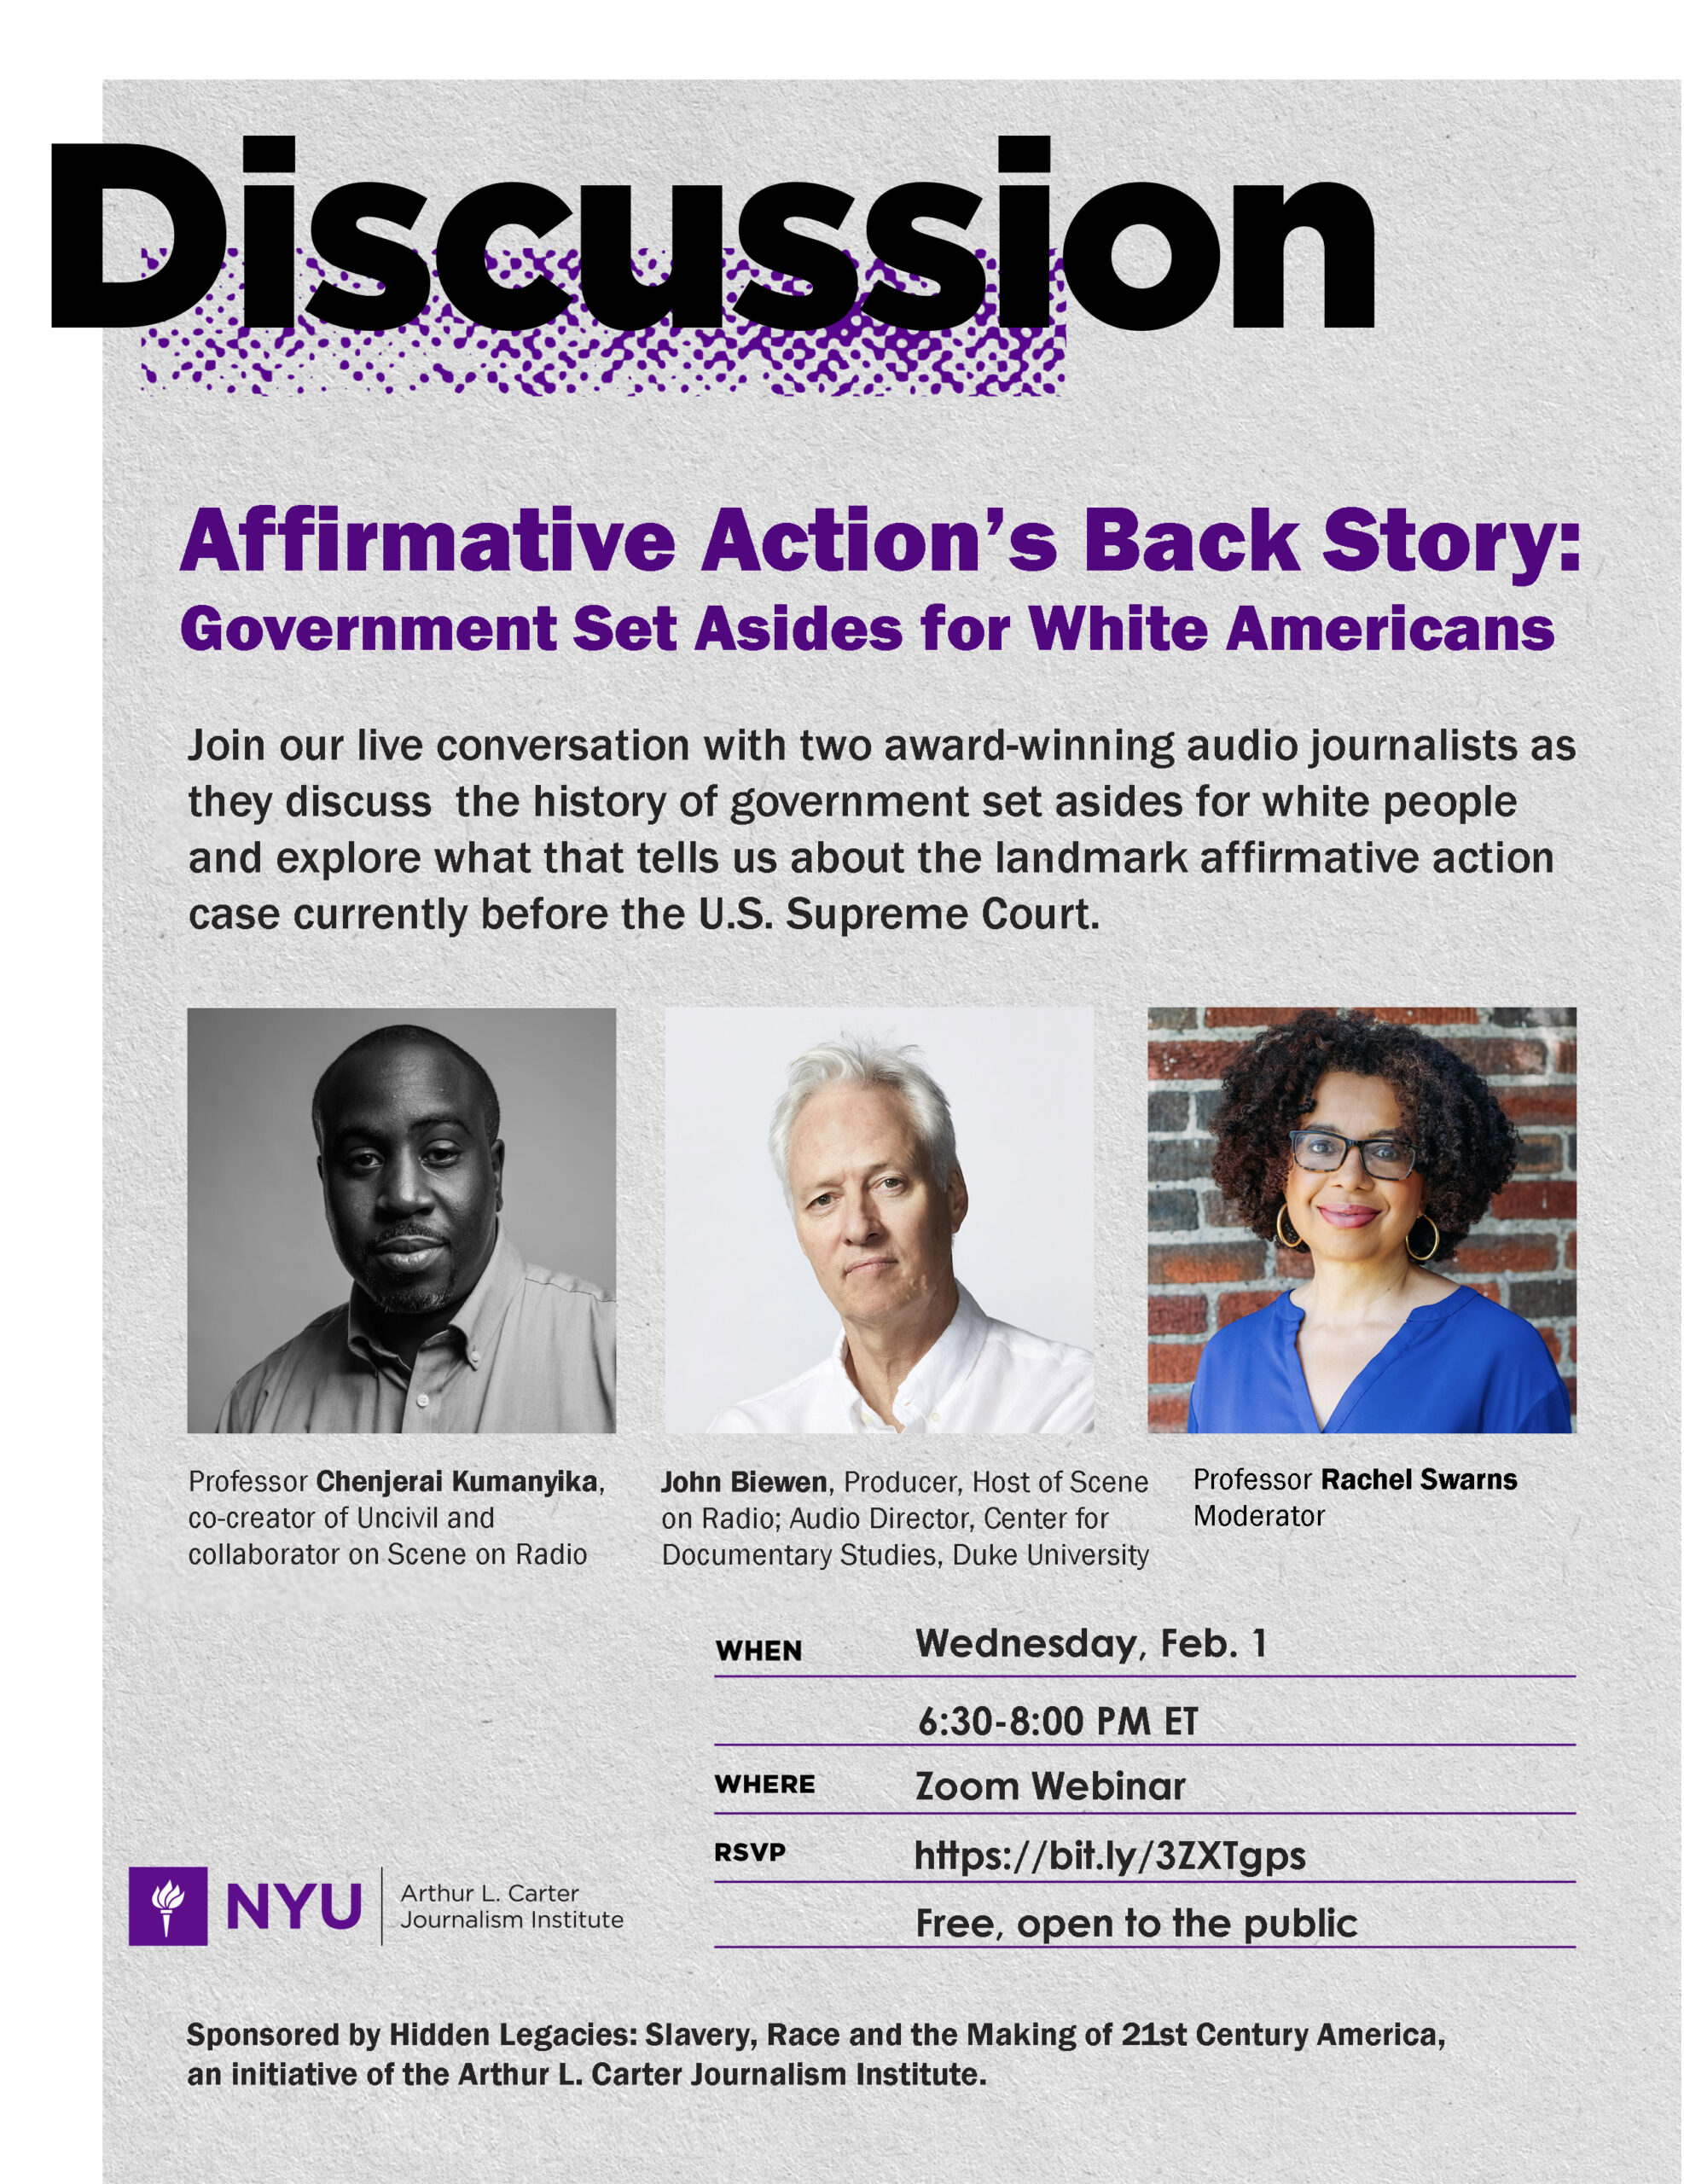 Affirmative Action's back story event poster.